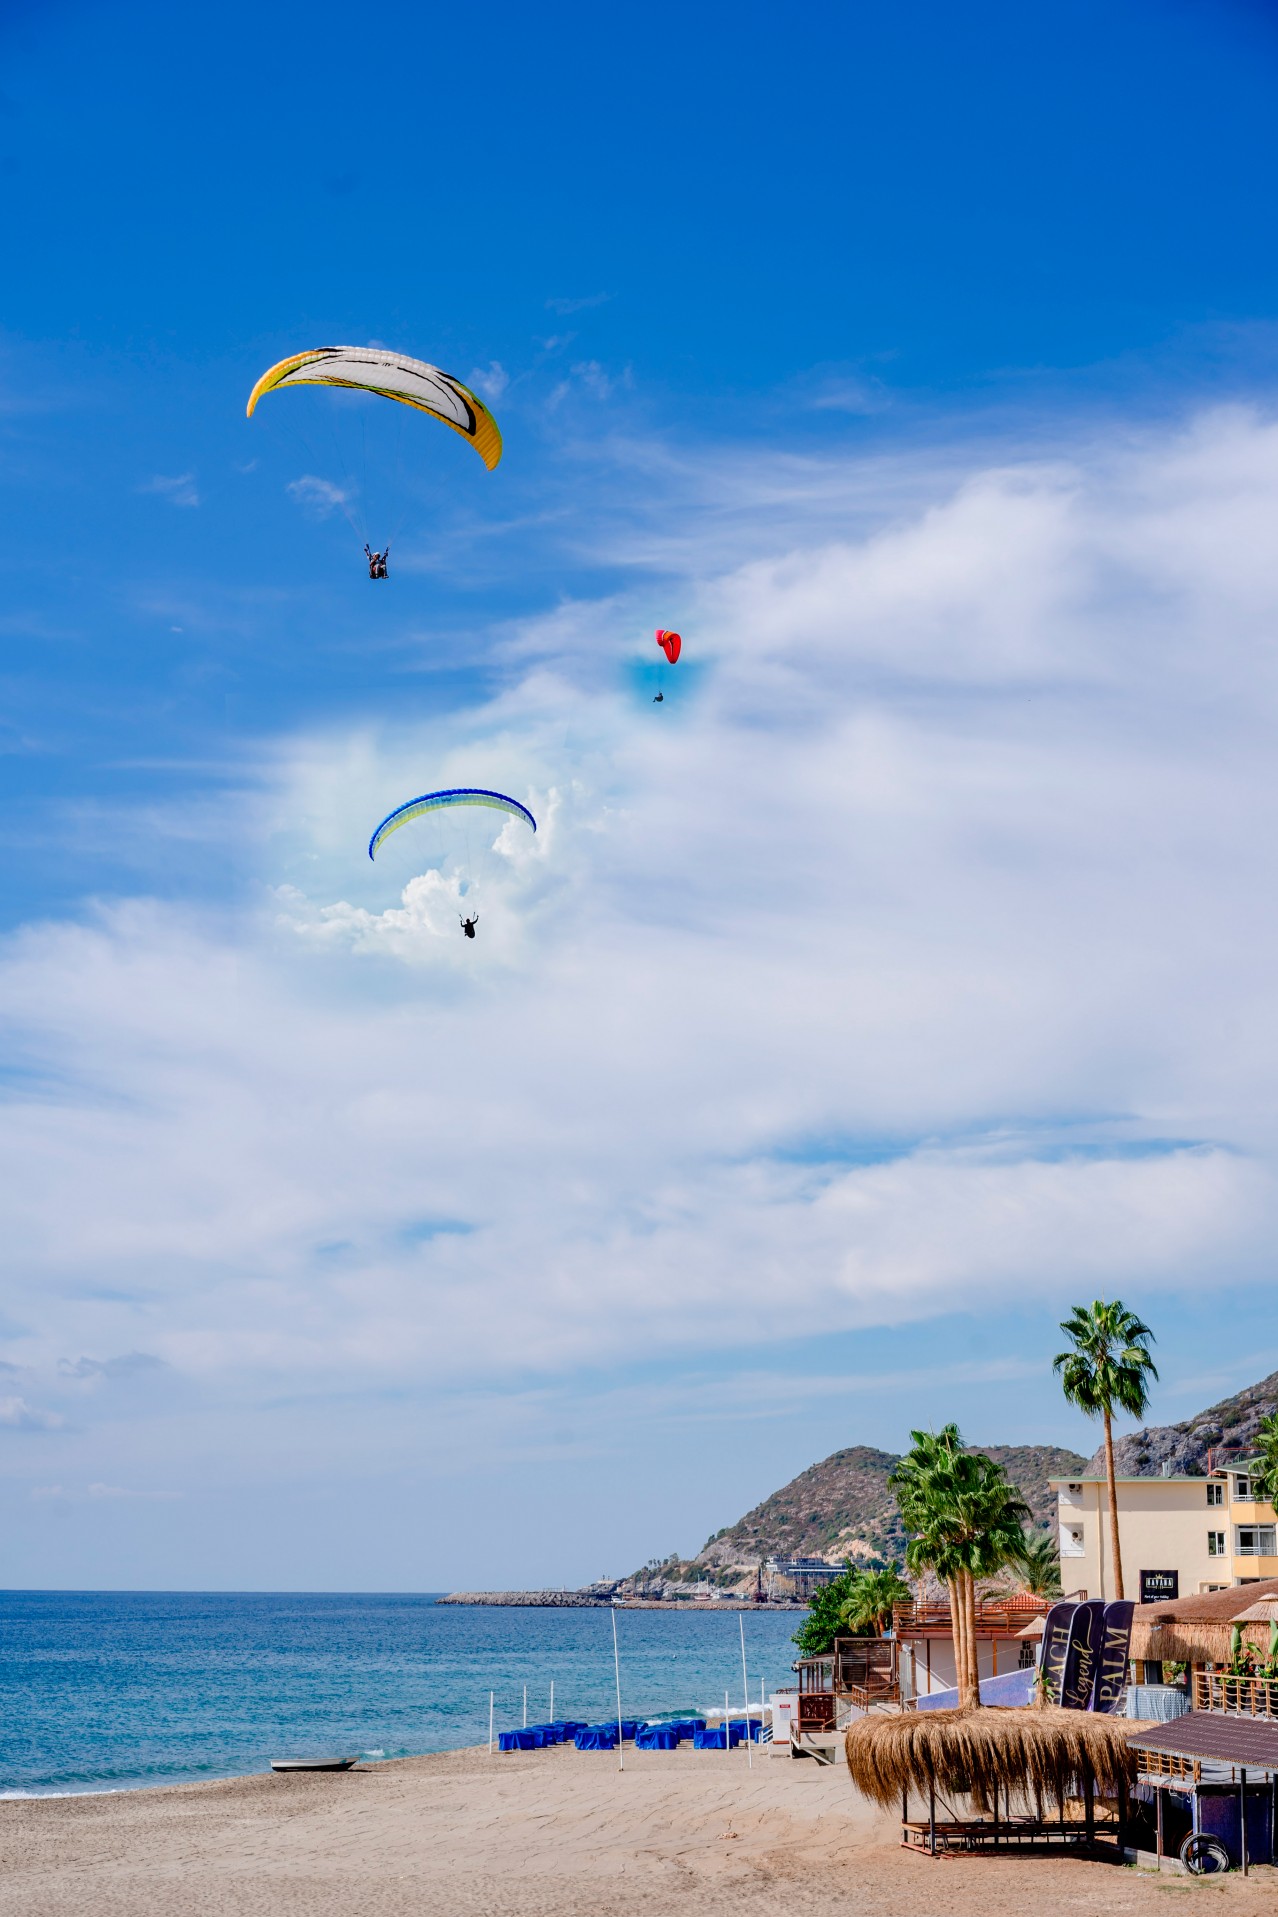 People paragliding in the sky at the sea coast